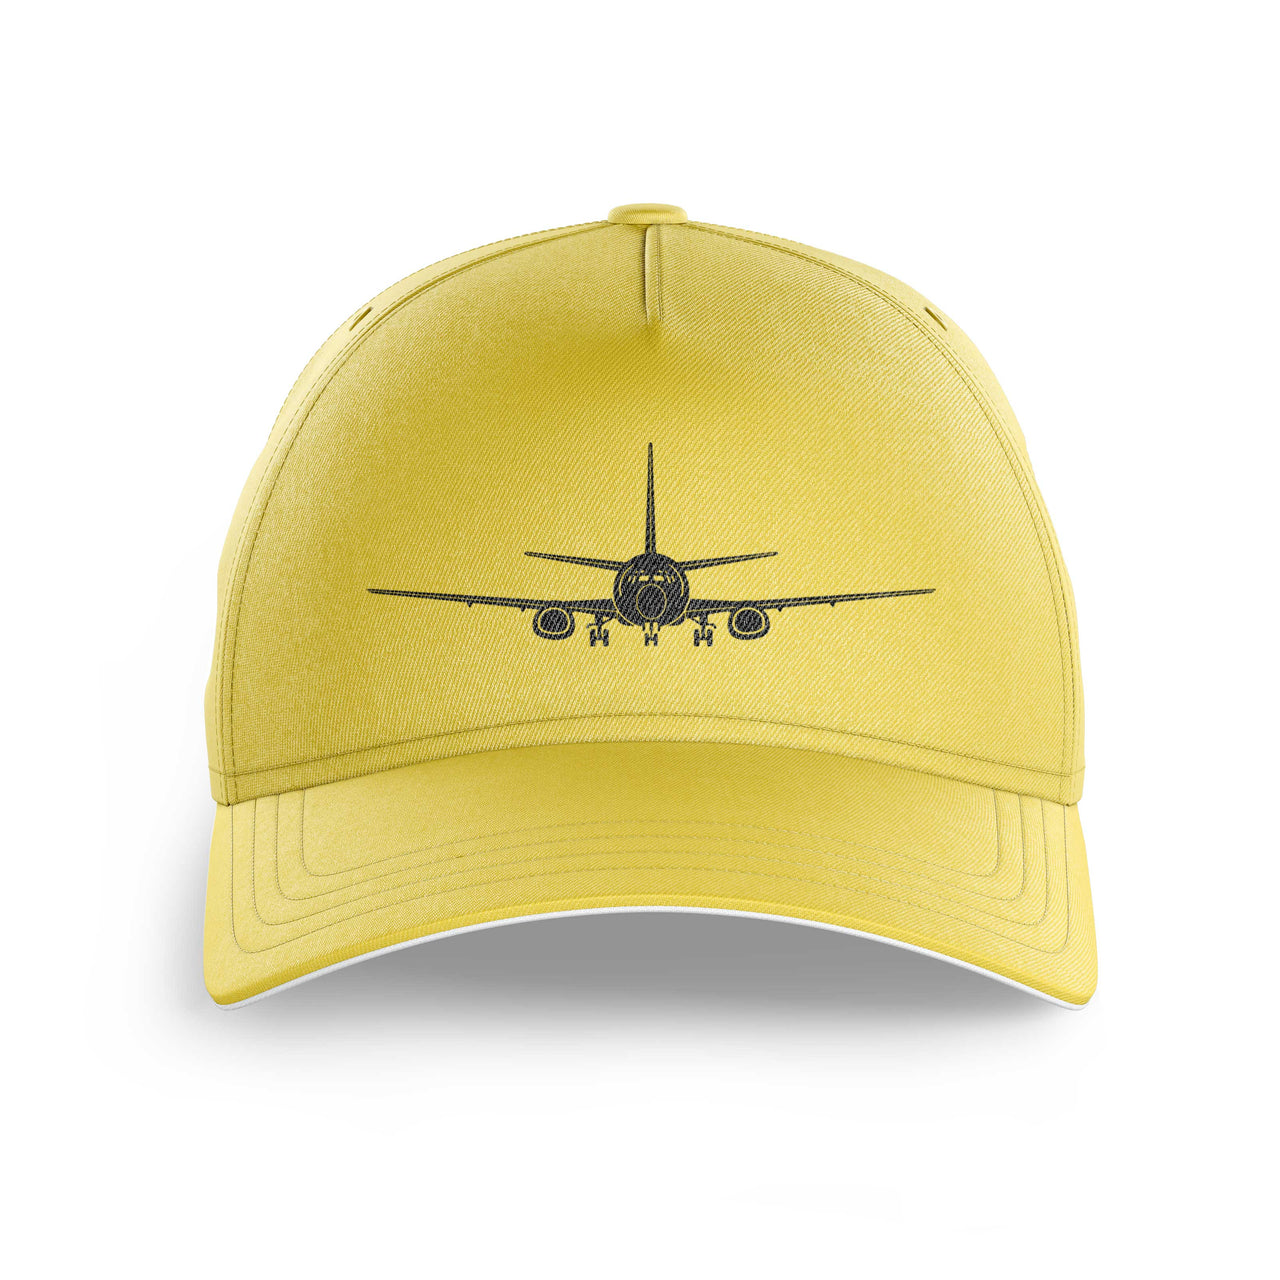 Boeing 737 Silhouette Printed Hats